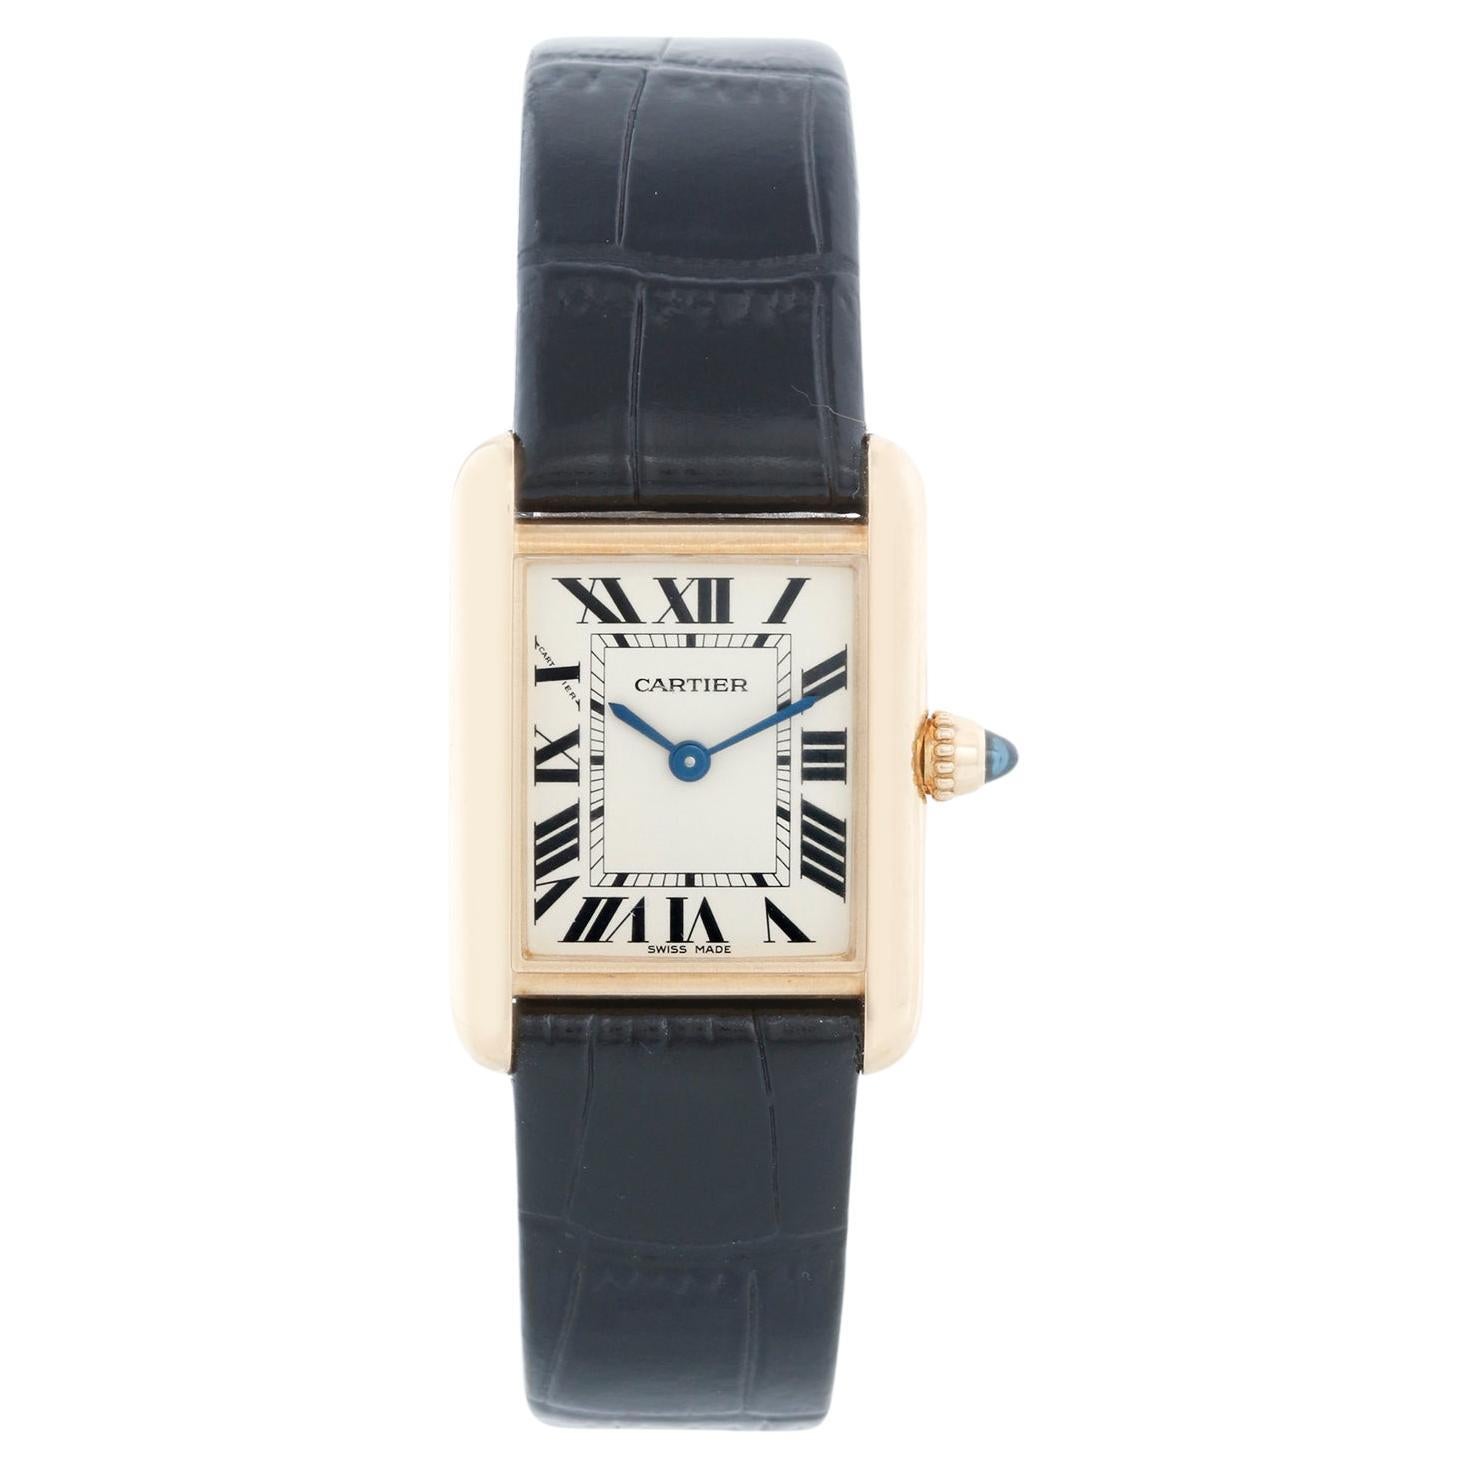 Cartier Tank 18k Yellow Gold Ladies Watch on Leather Band 2442 W1529856